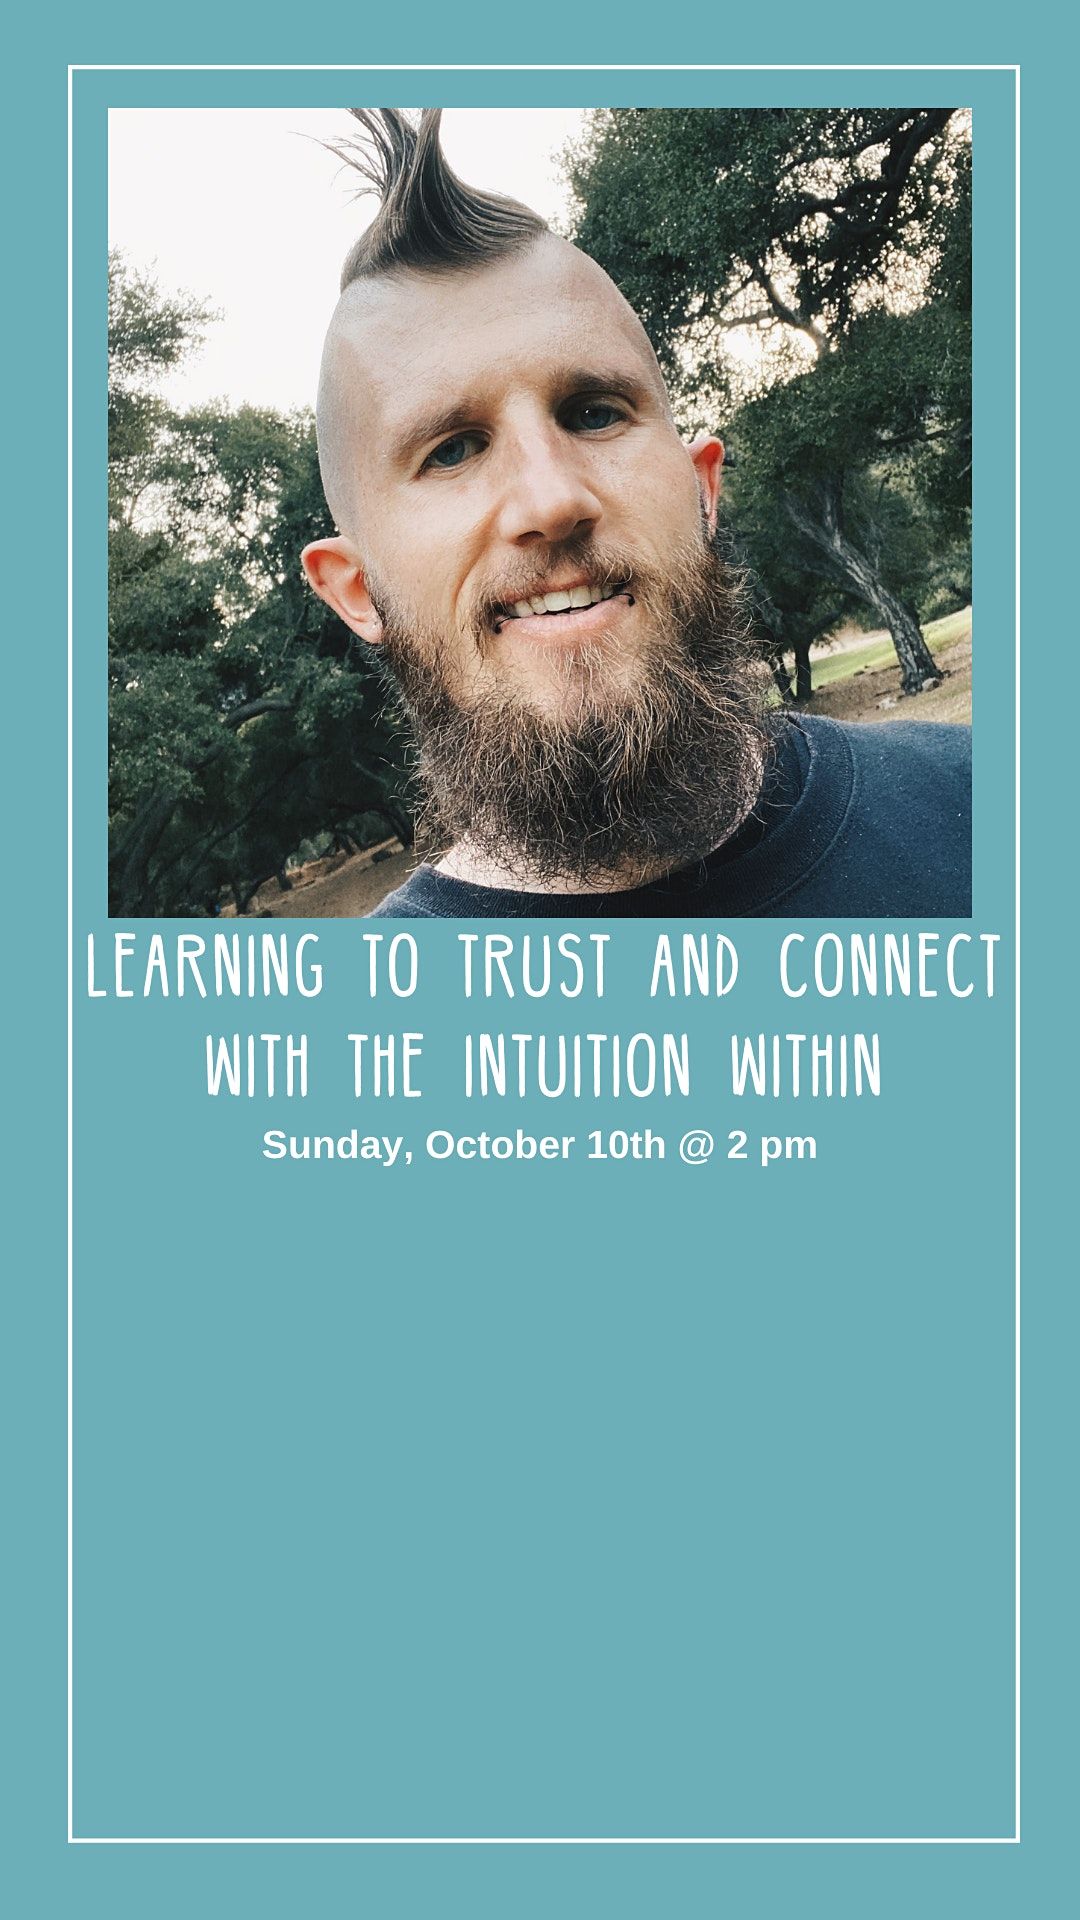 Learning to Trust and Connect with the Intuition Within